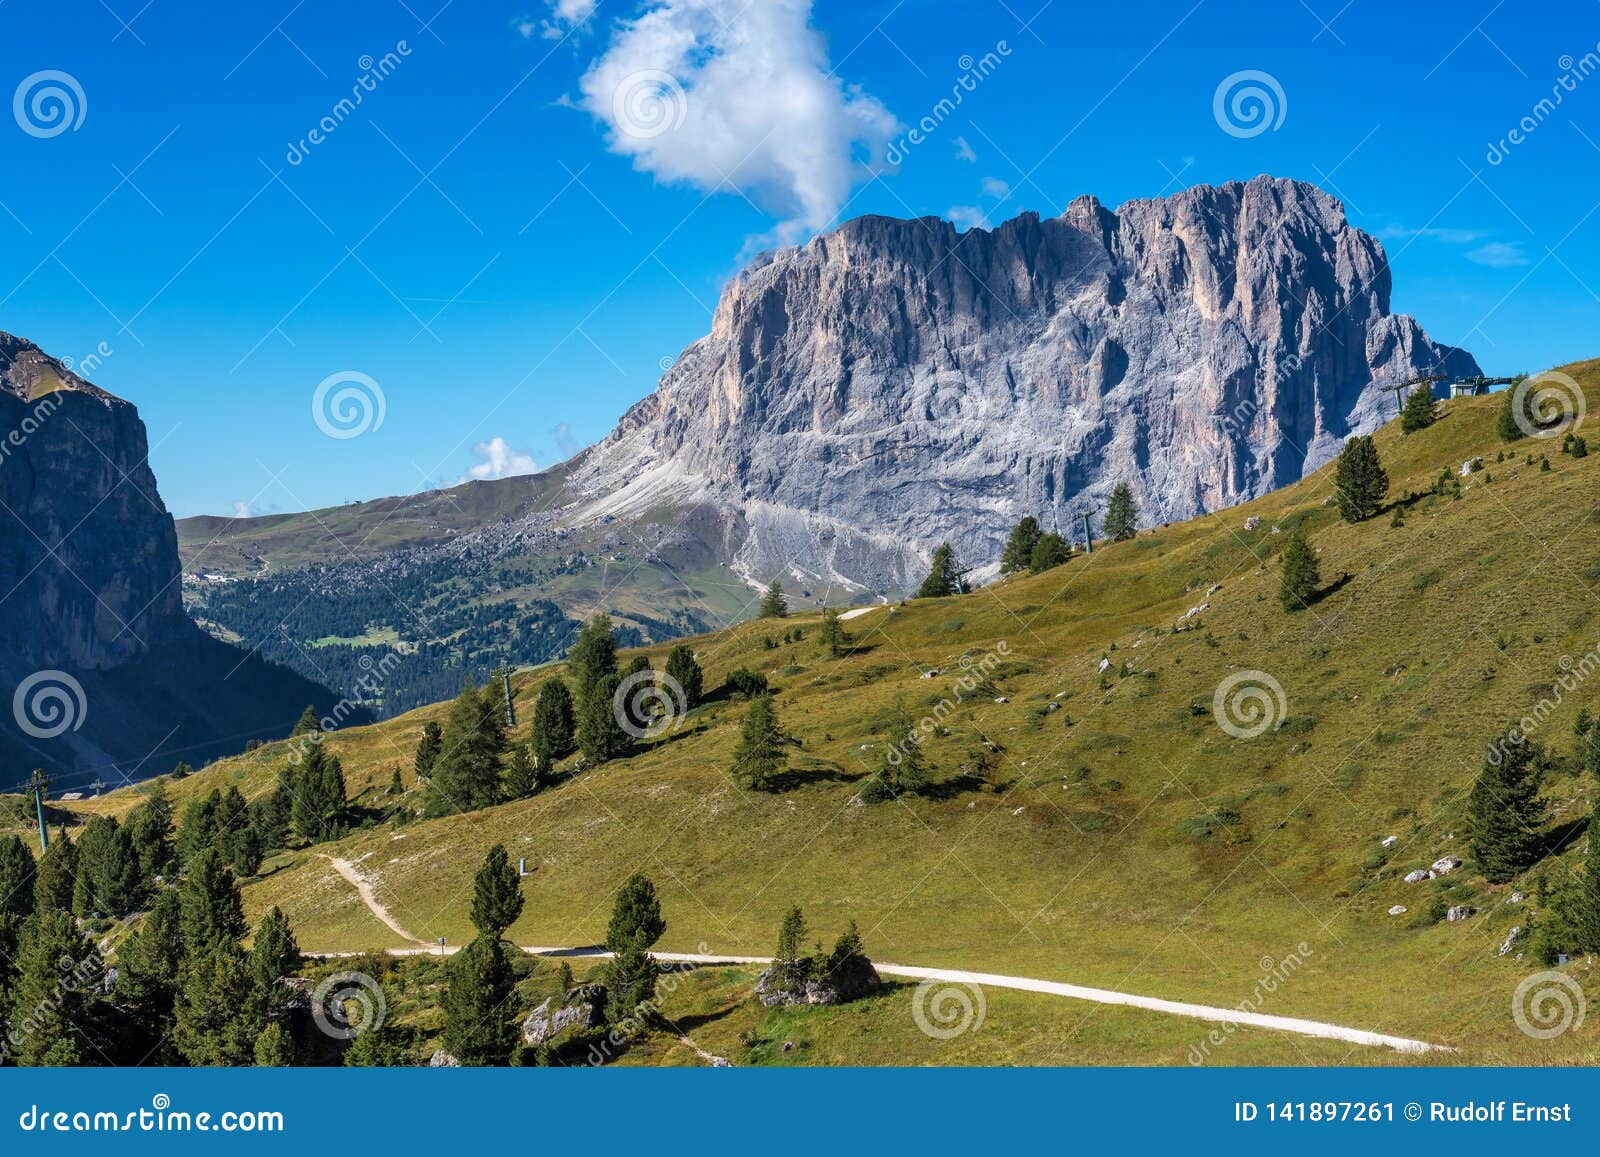 Journey To The Dolomites, Northern Italy Stock Image 